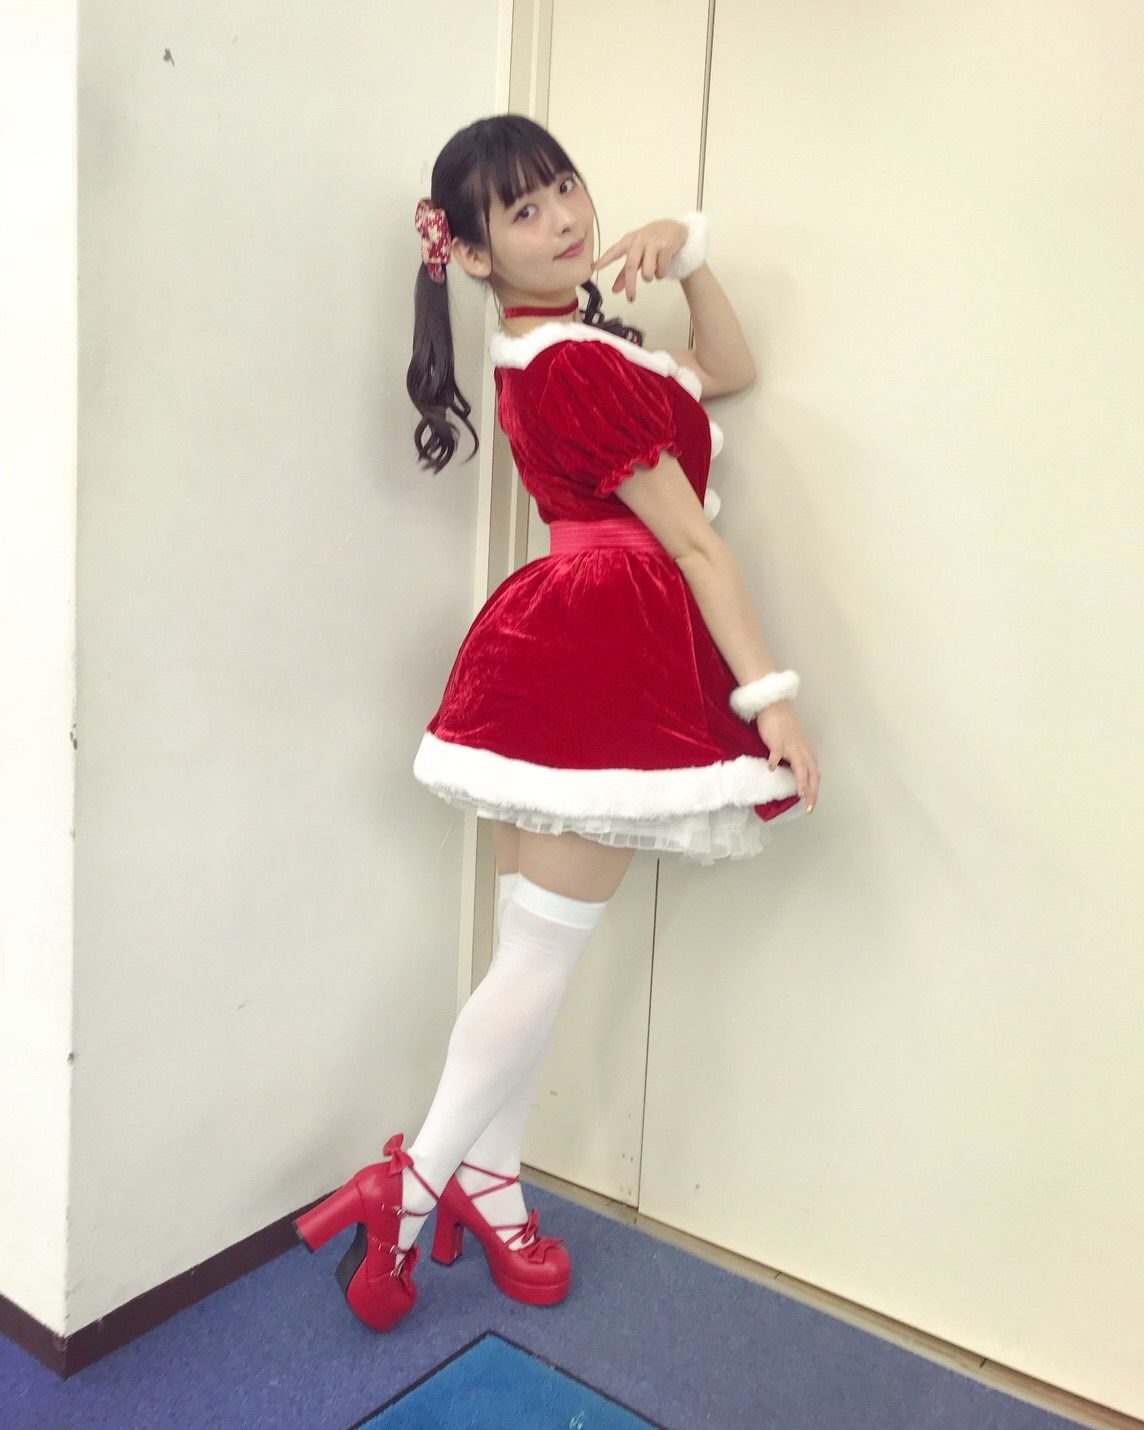 Sumire Uesaka "to emphasize the thigh... W] also erotic image offer Wwwwwww 8